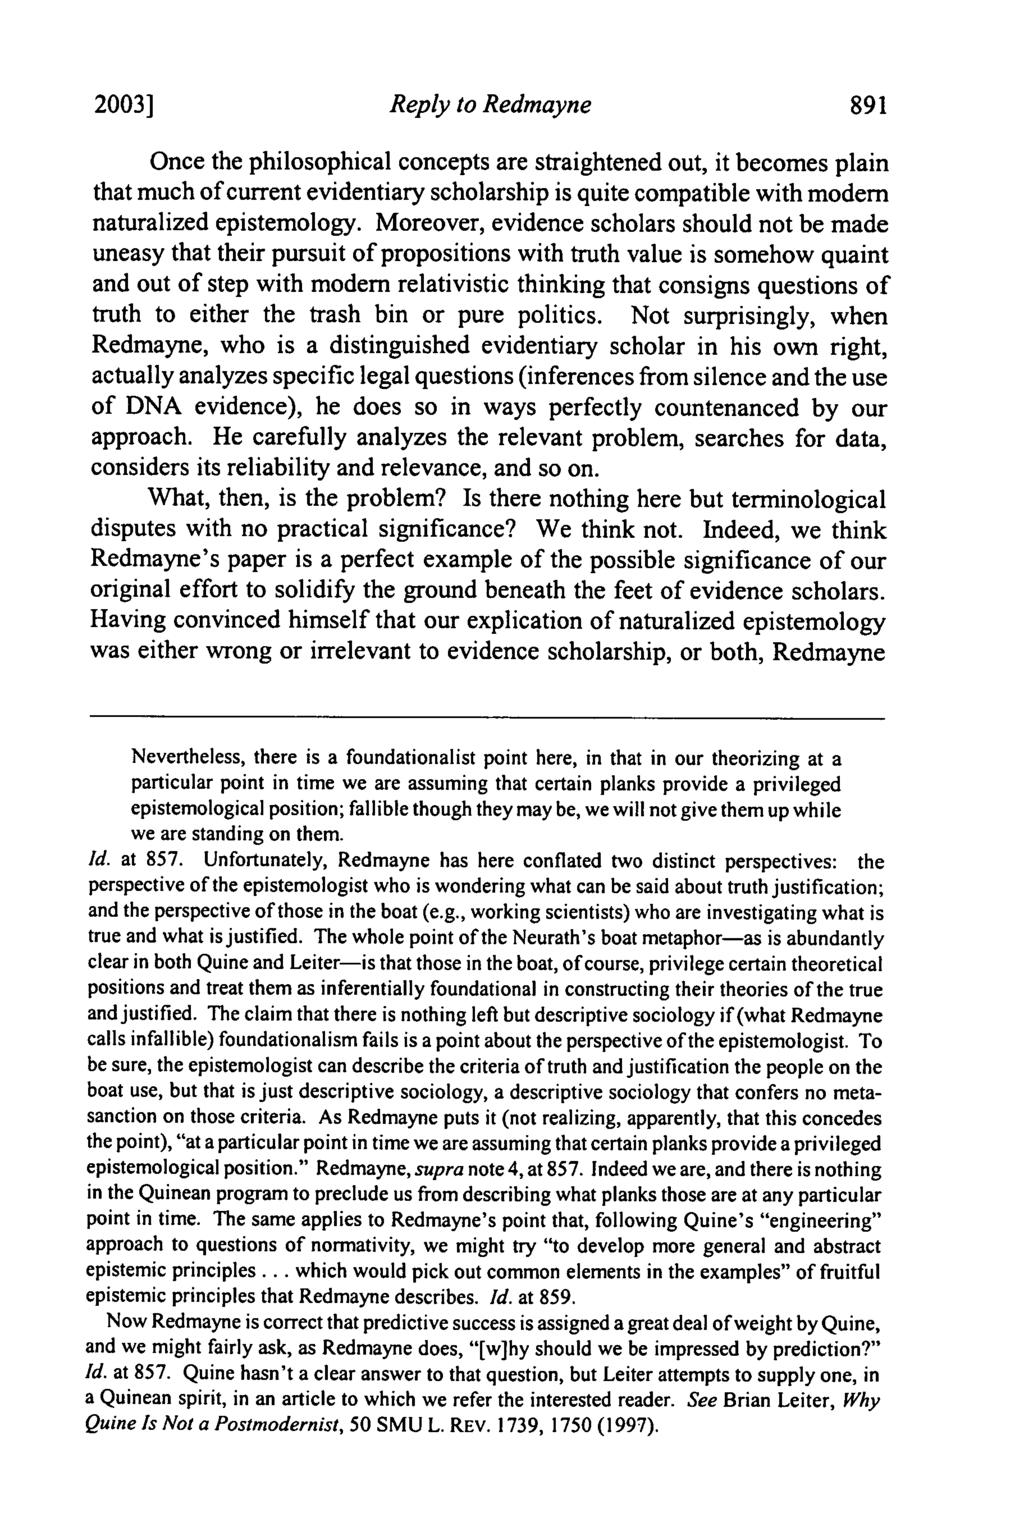 2003] Reply to Redmayne Once the philosophical concepts are straightened out, it becomes plain that much of current evidentiary scholarship is quite compatible with modem naturalized epistemology.